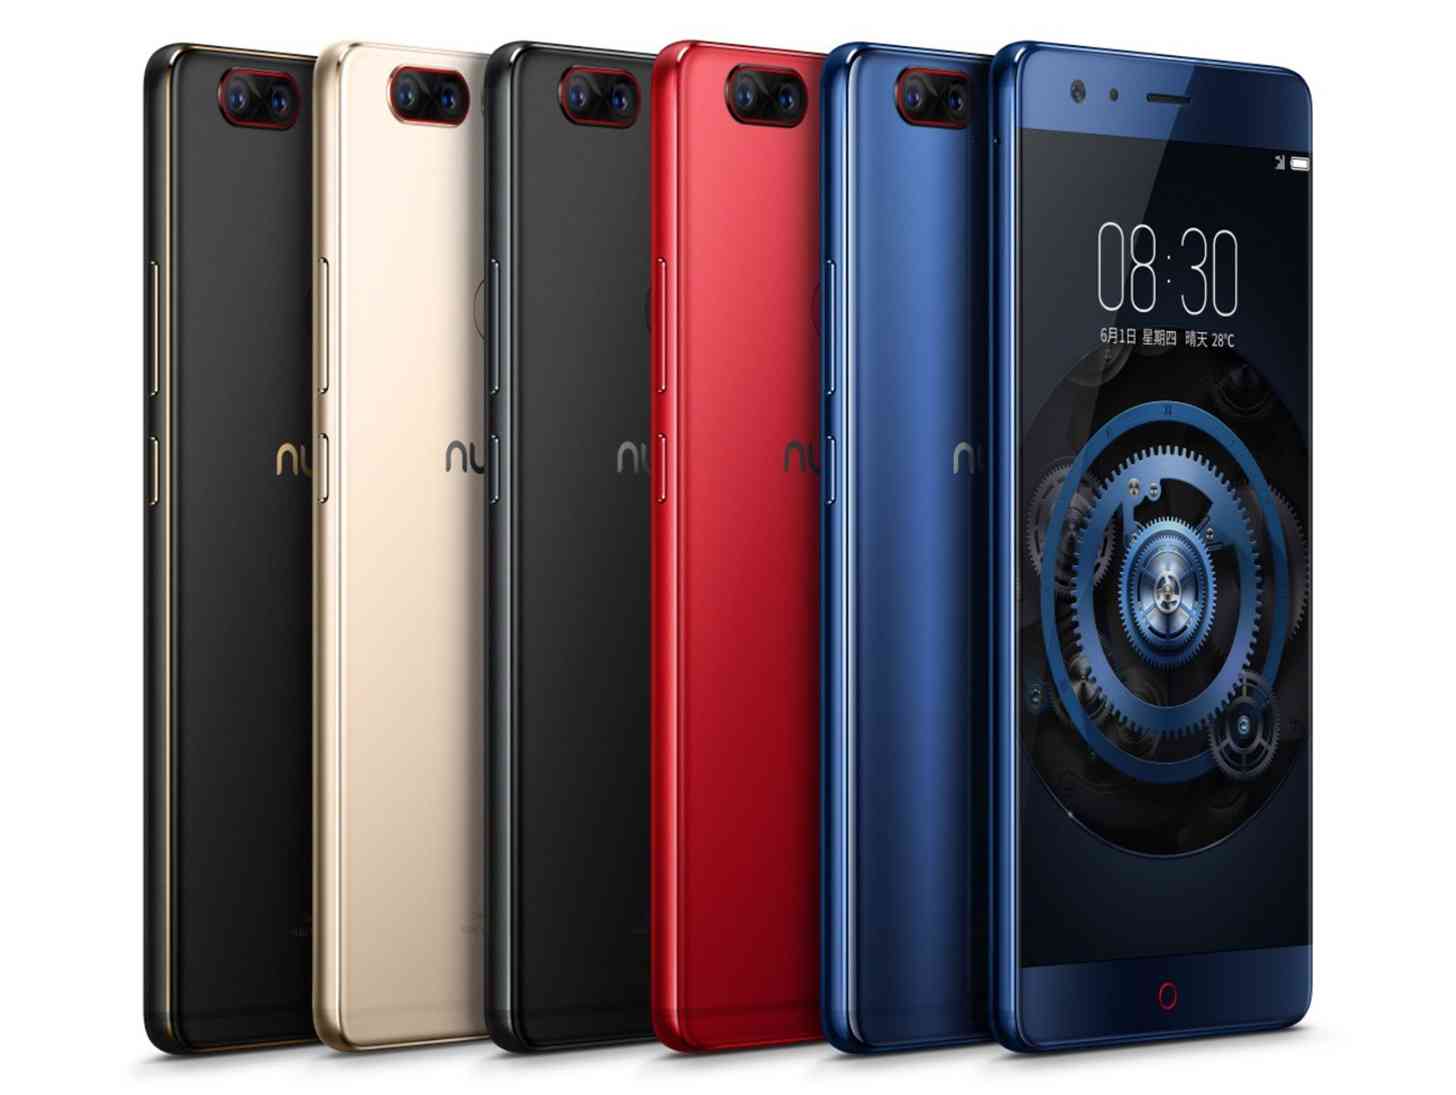 Nubia Z17 Smartphone With Exquisite Design And Dual Camera Features